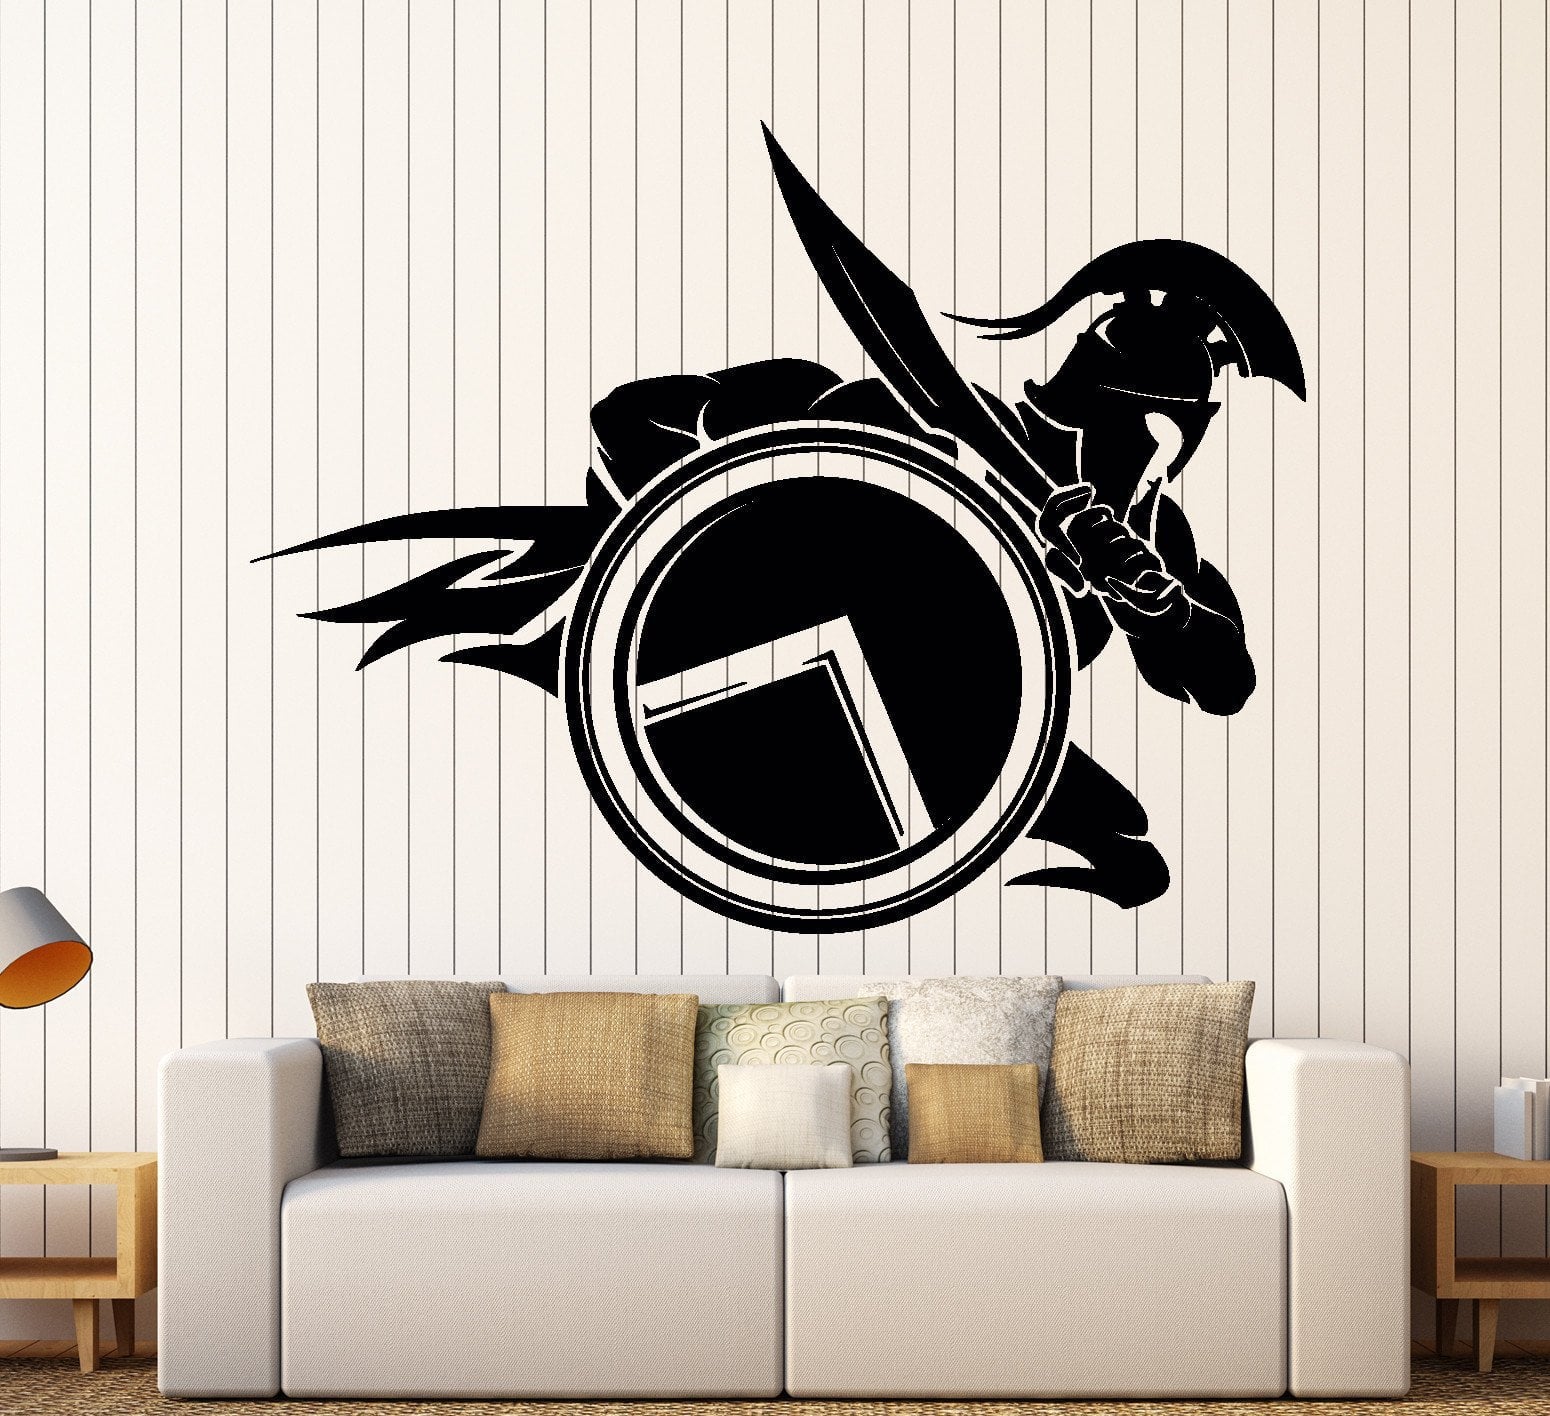 LV-426 warrior Wall Mural  Buy online at Europosters